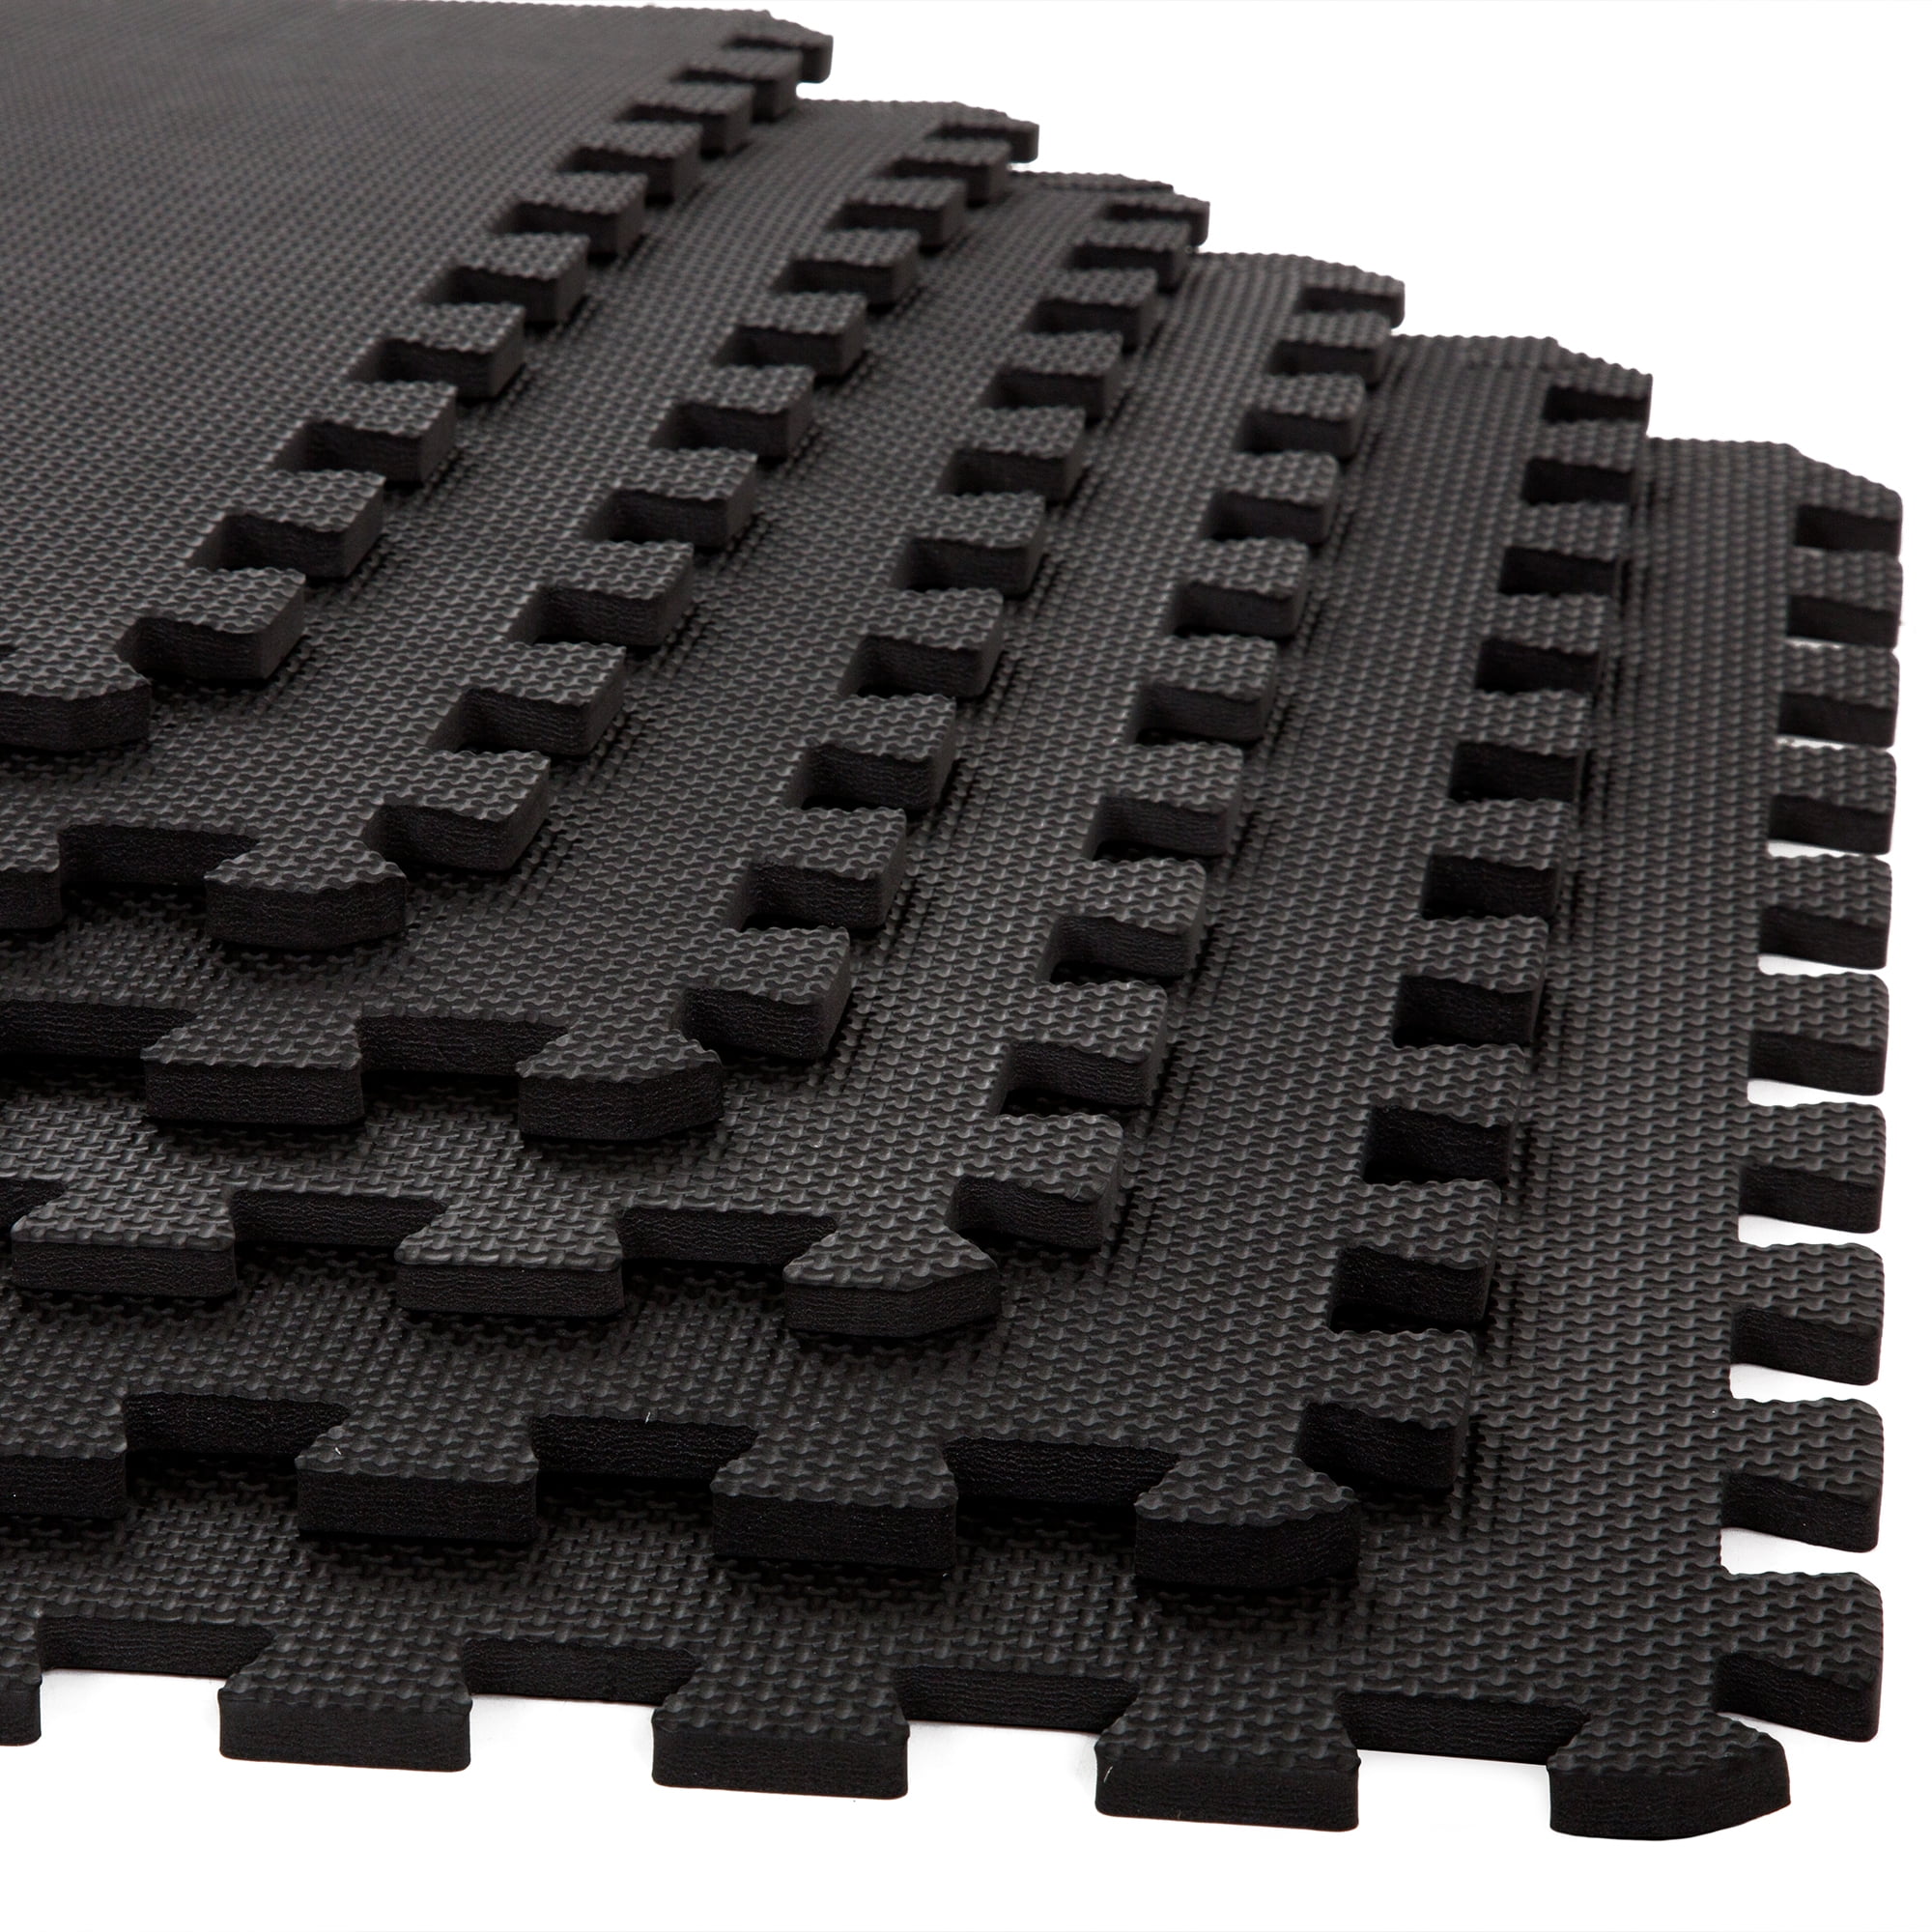 Foam Mat Floor Tiles 6PC Set - Interlocking EVA Foam Padding with Soft  Carpet Top for Exercise and Yoga by Stalwart (Gray) - On Sale - Bed Bath &  Beyond - 26062412